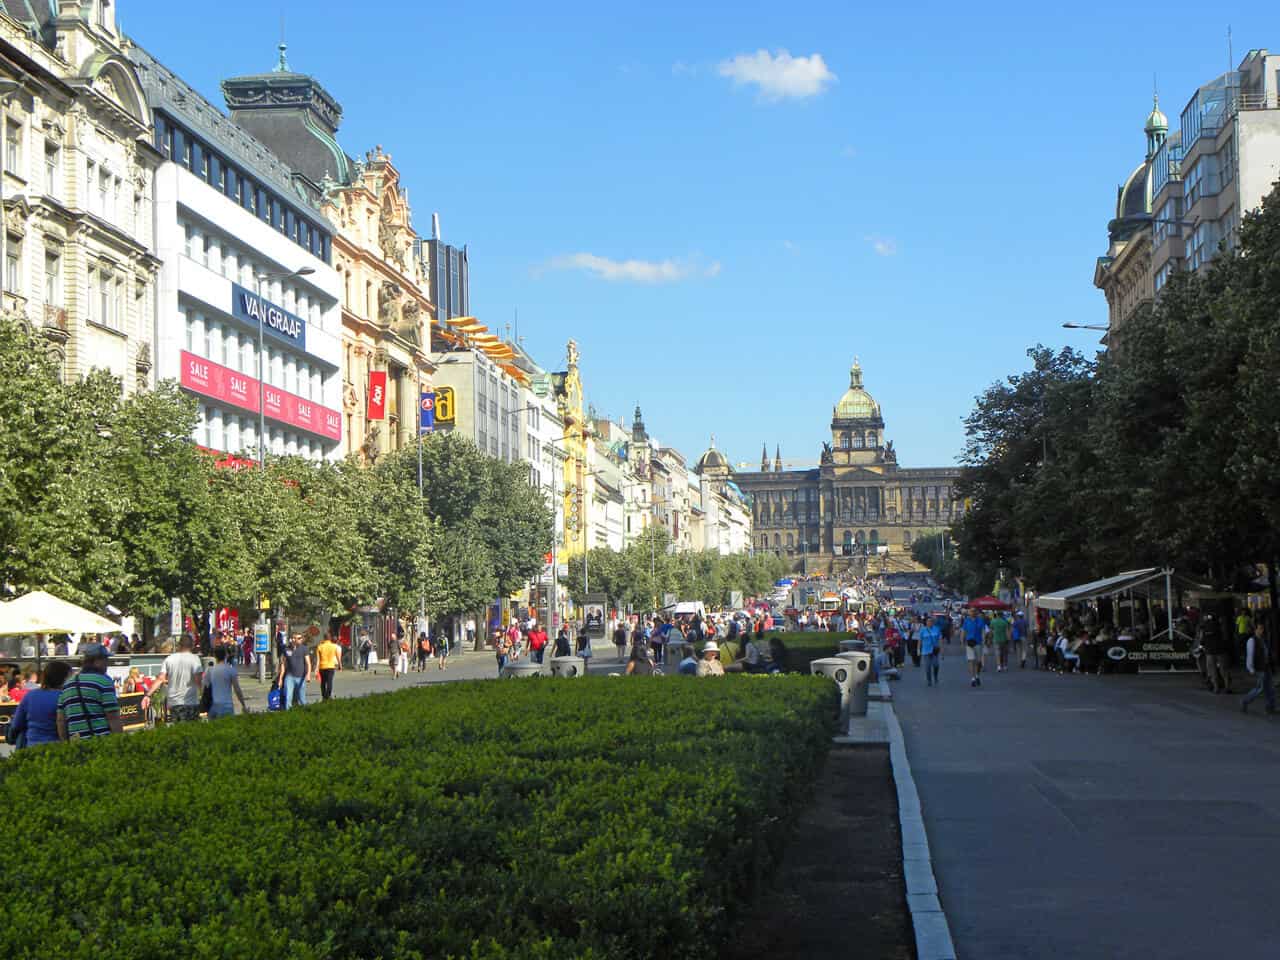 Wenceslas Square. Things to consider when choosing a guide in Prague